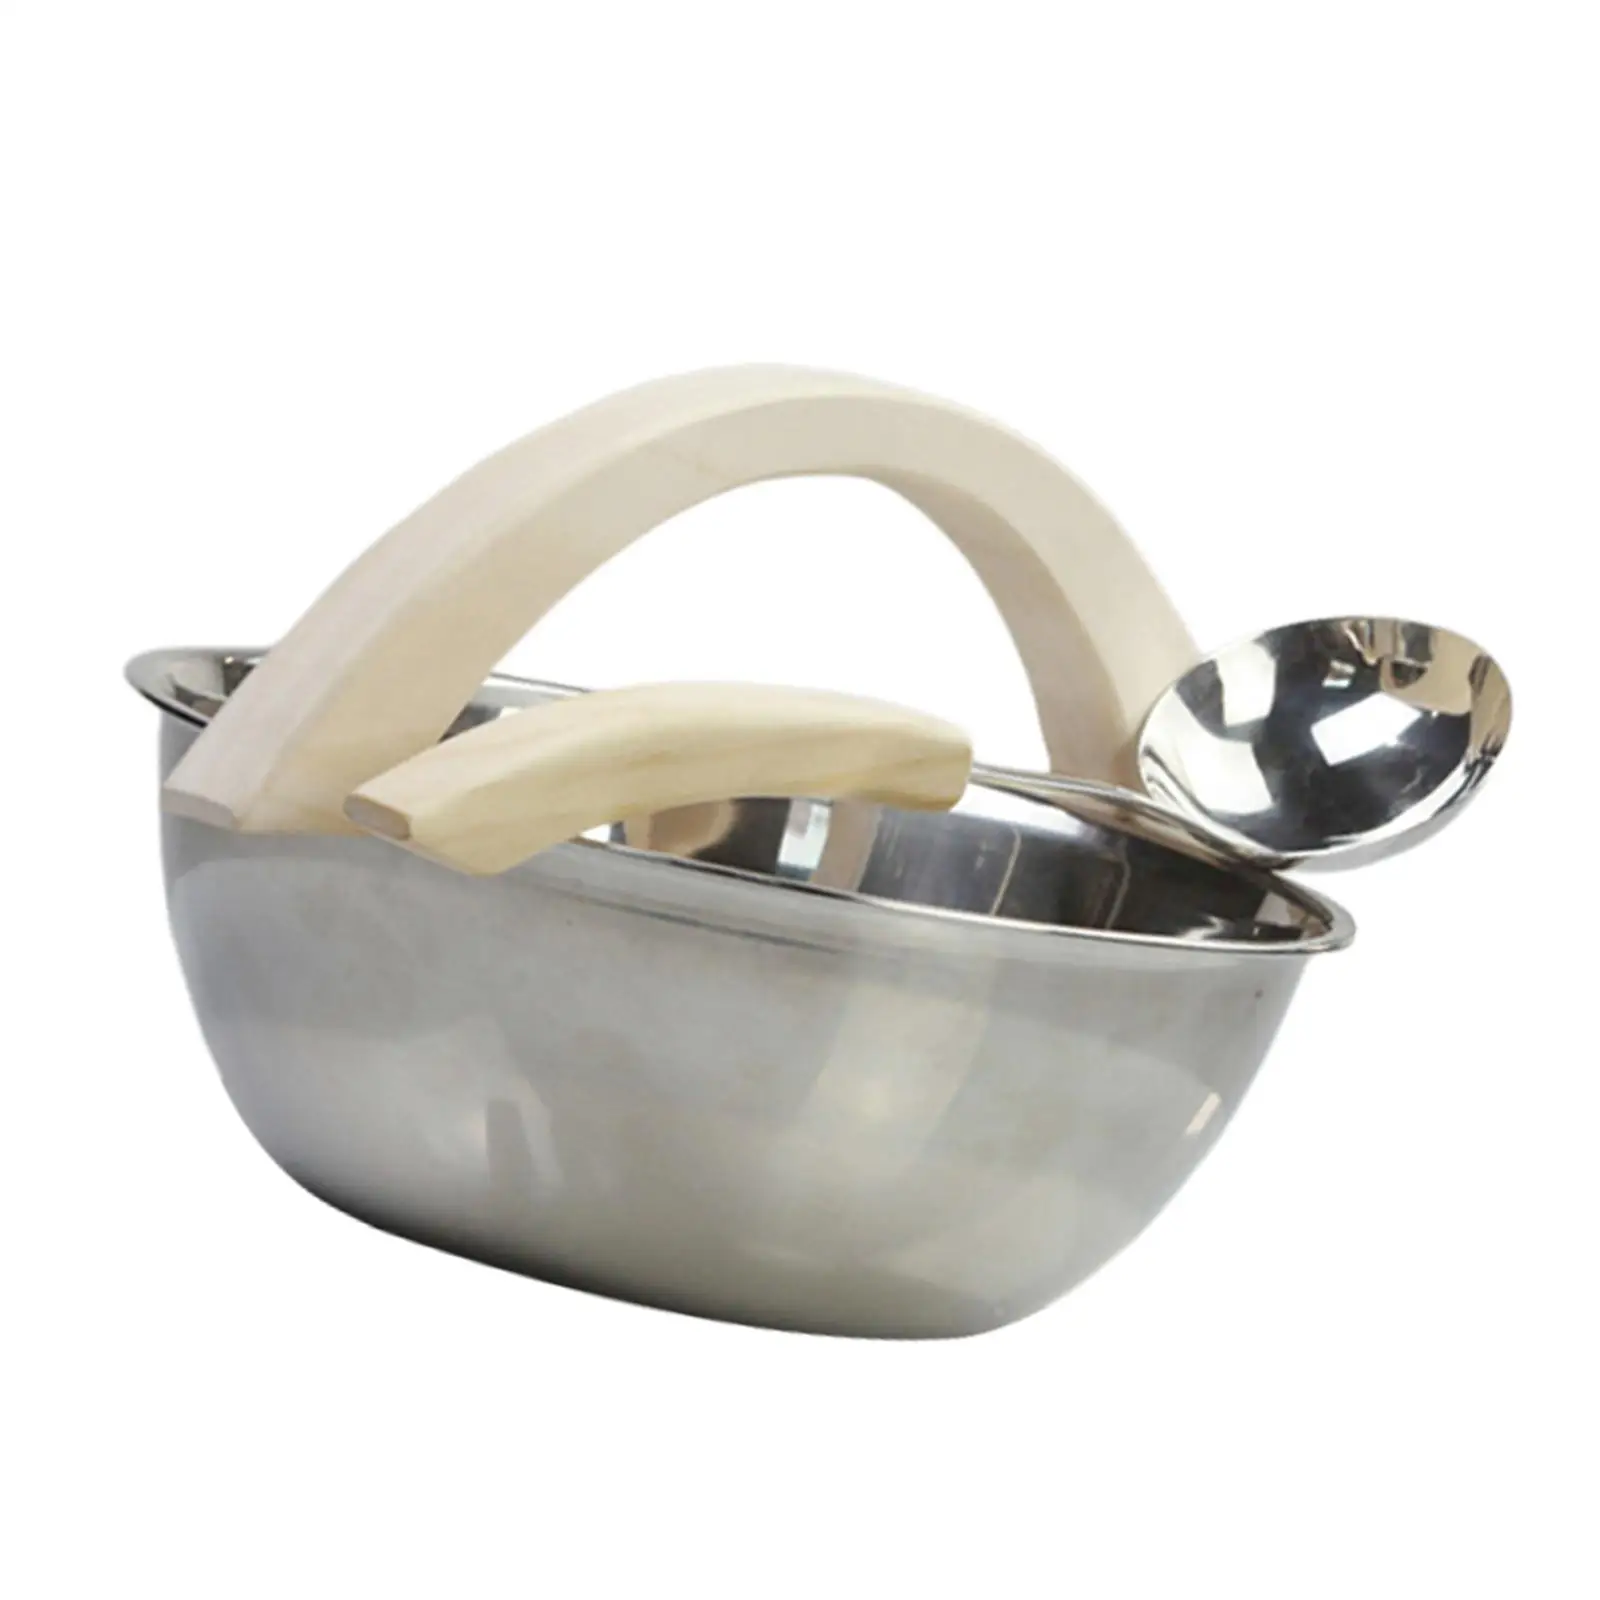 7L  Barrel Stainless Steel Basin with Long Handle Spoon  Room Accessory Practical Use Durable Accessory Wooden Handles